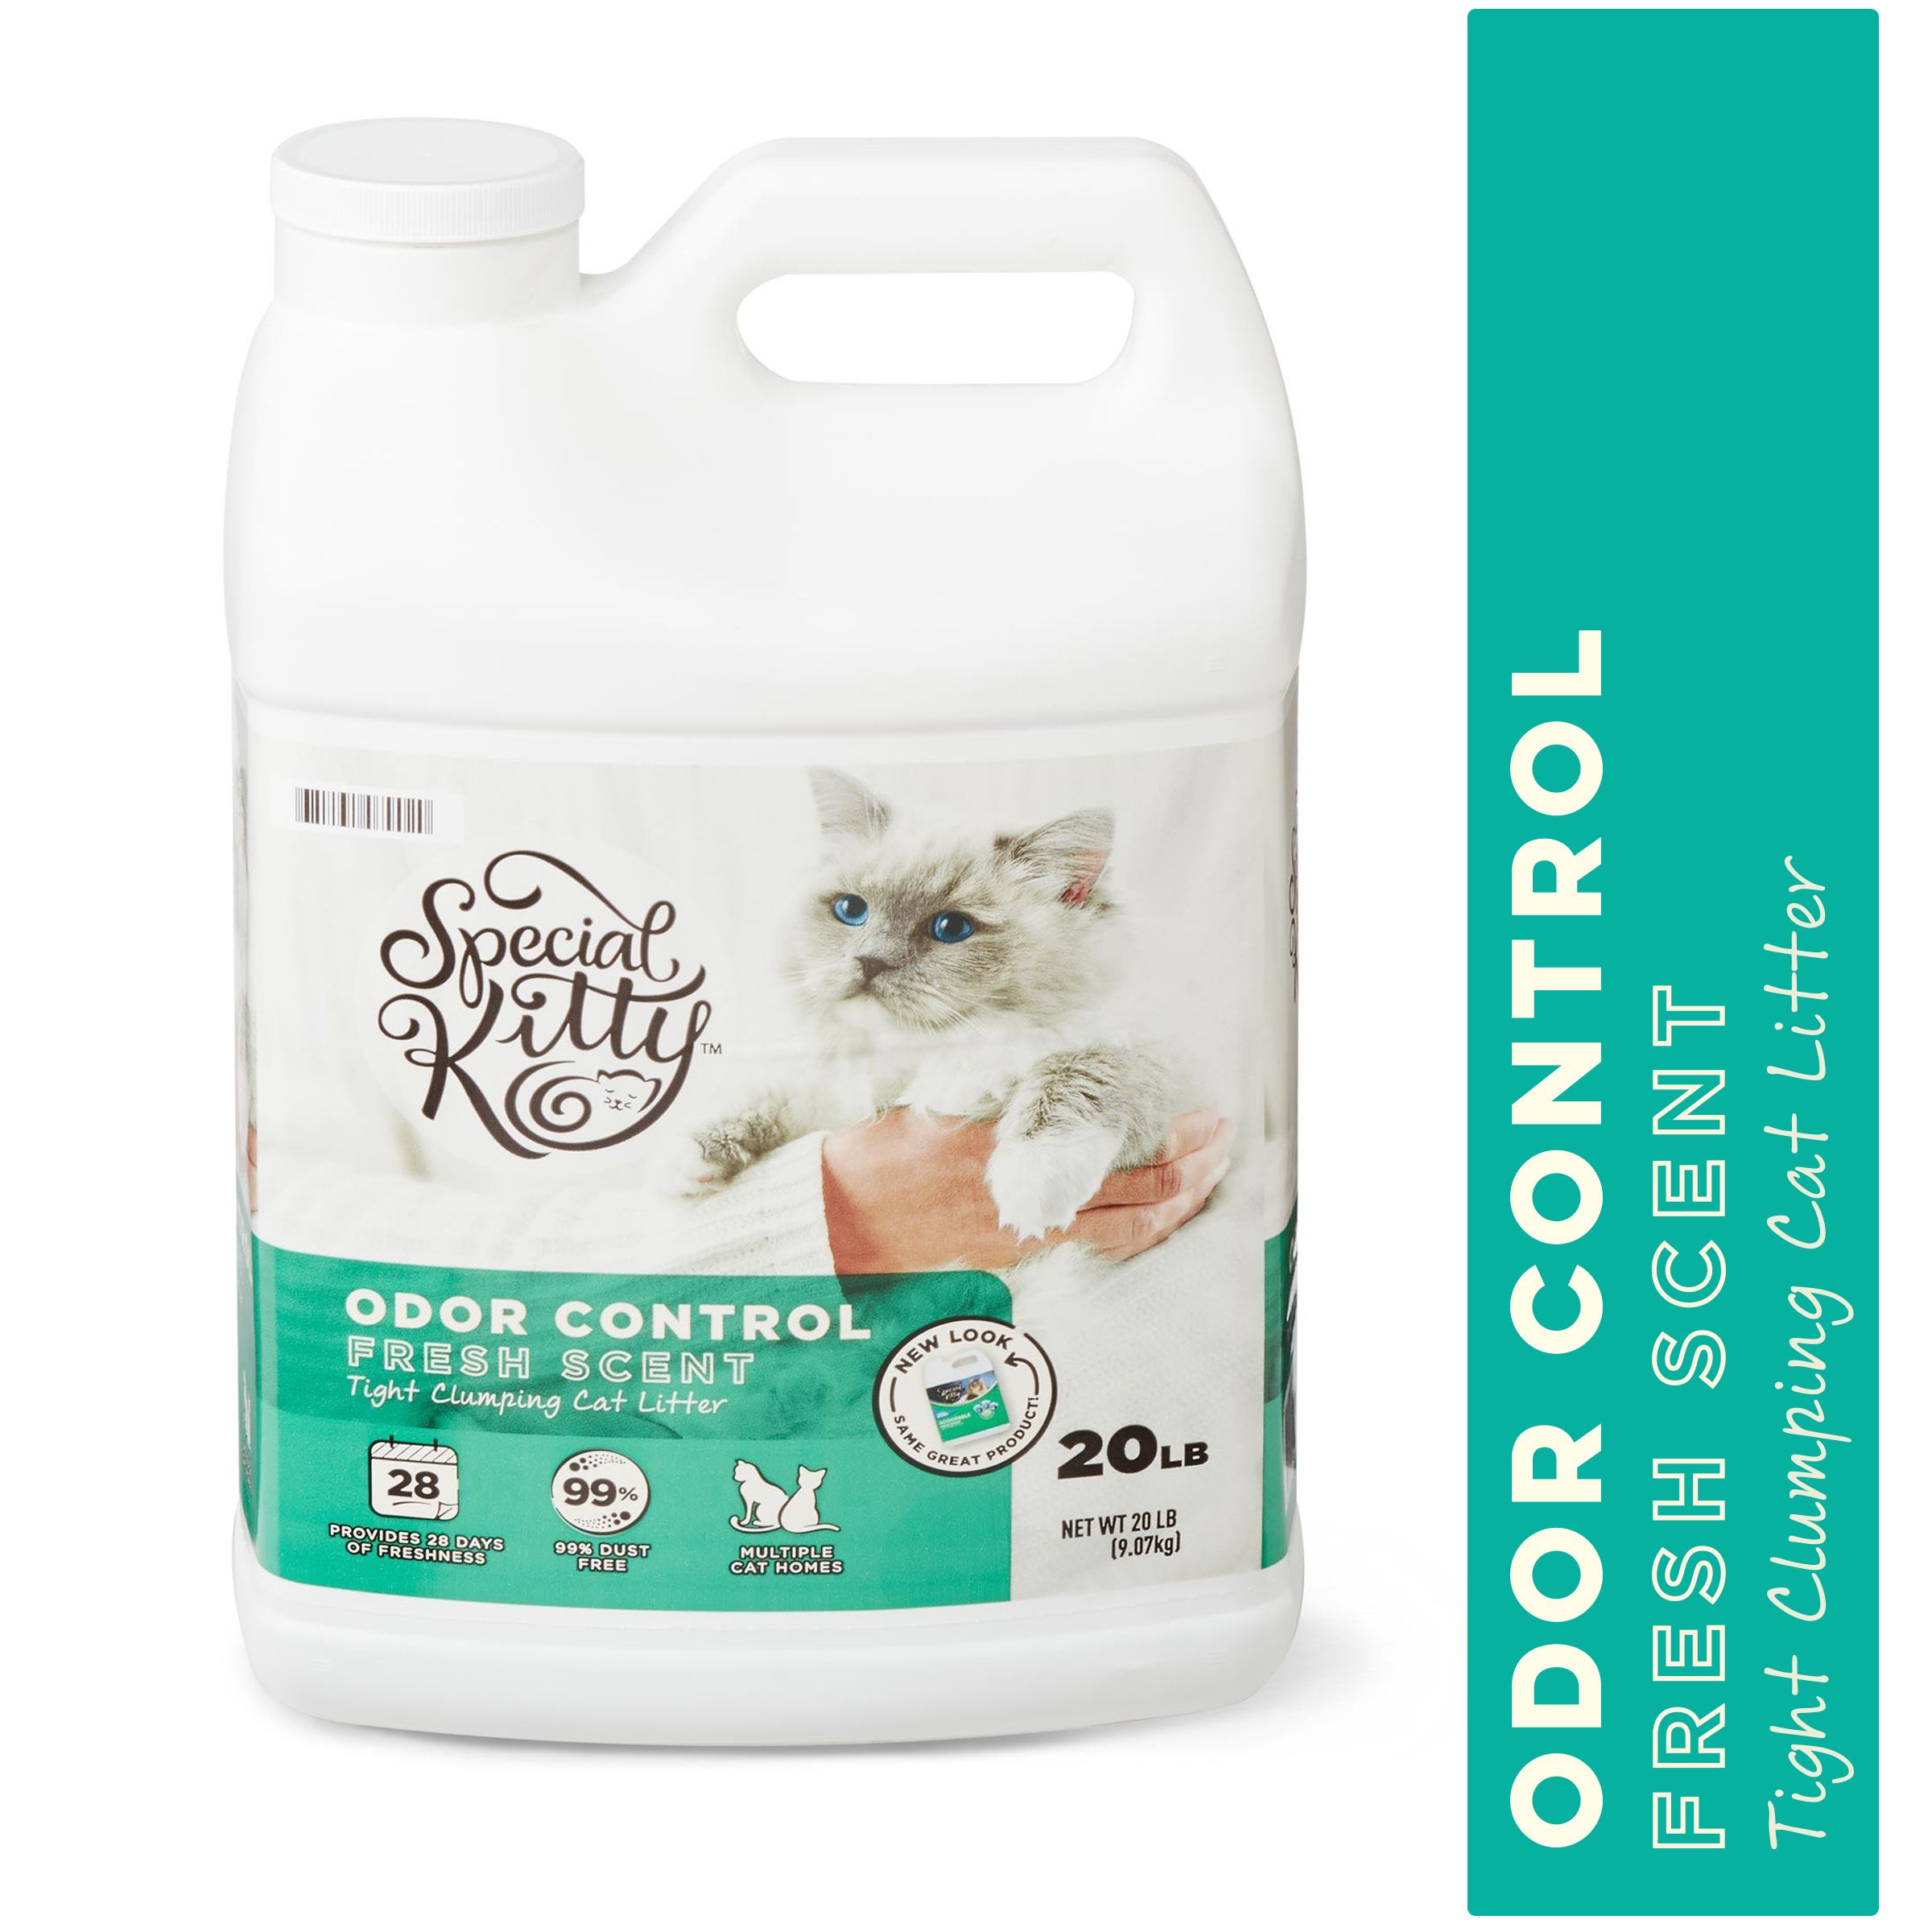 Top-Rated Odor Control Cat Litters